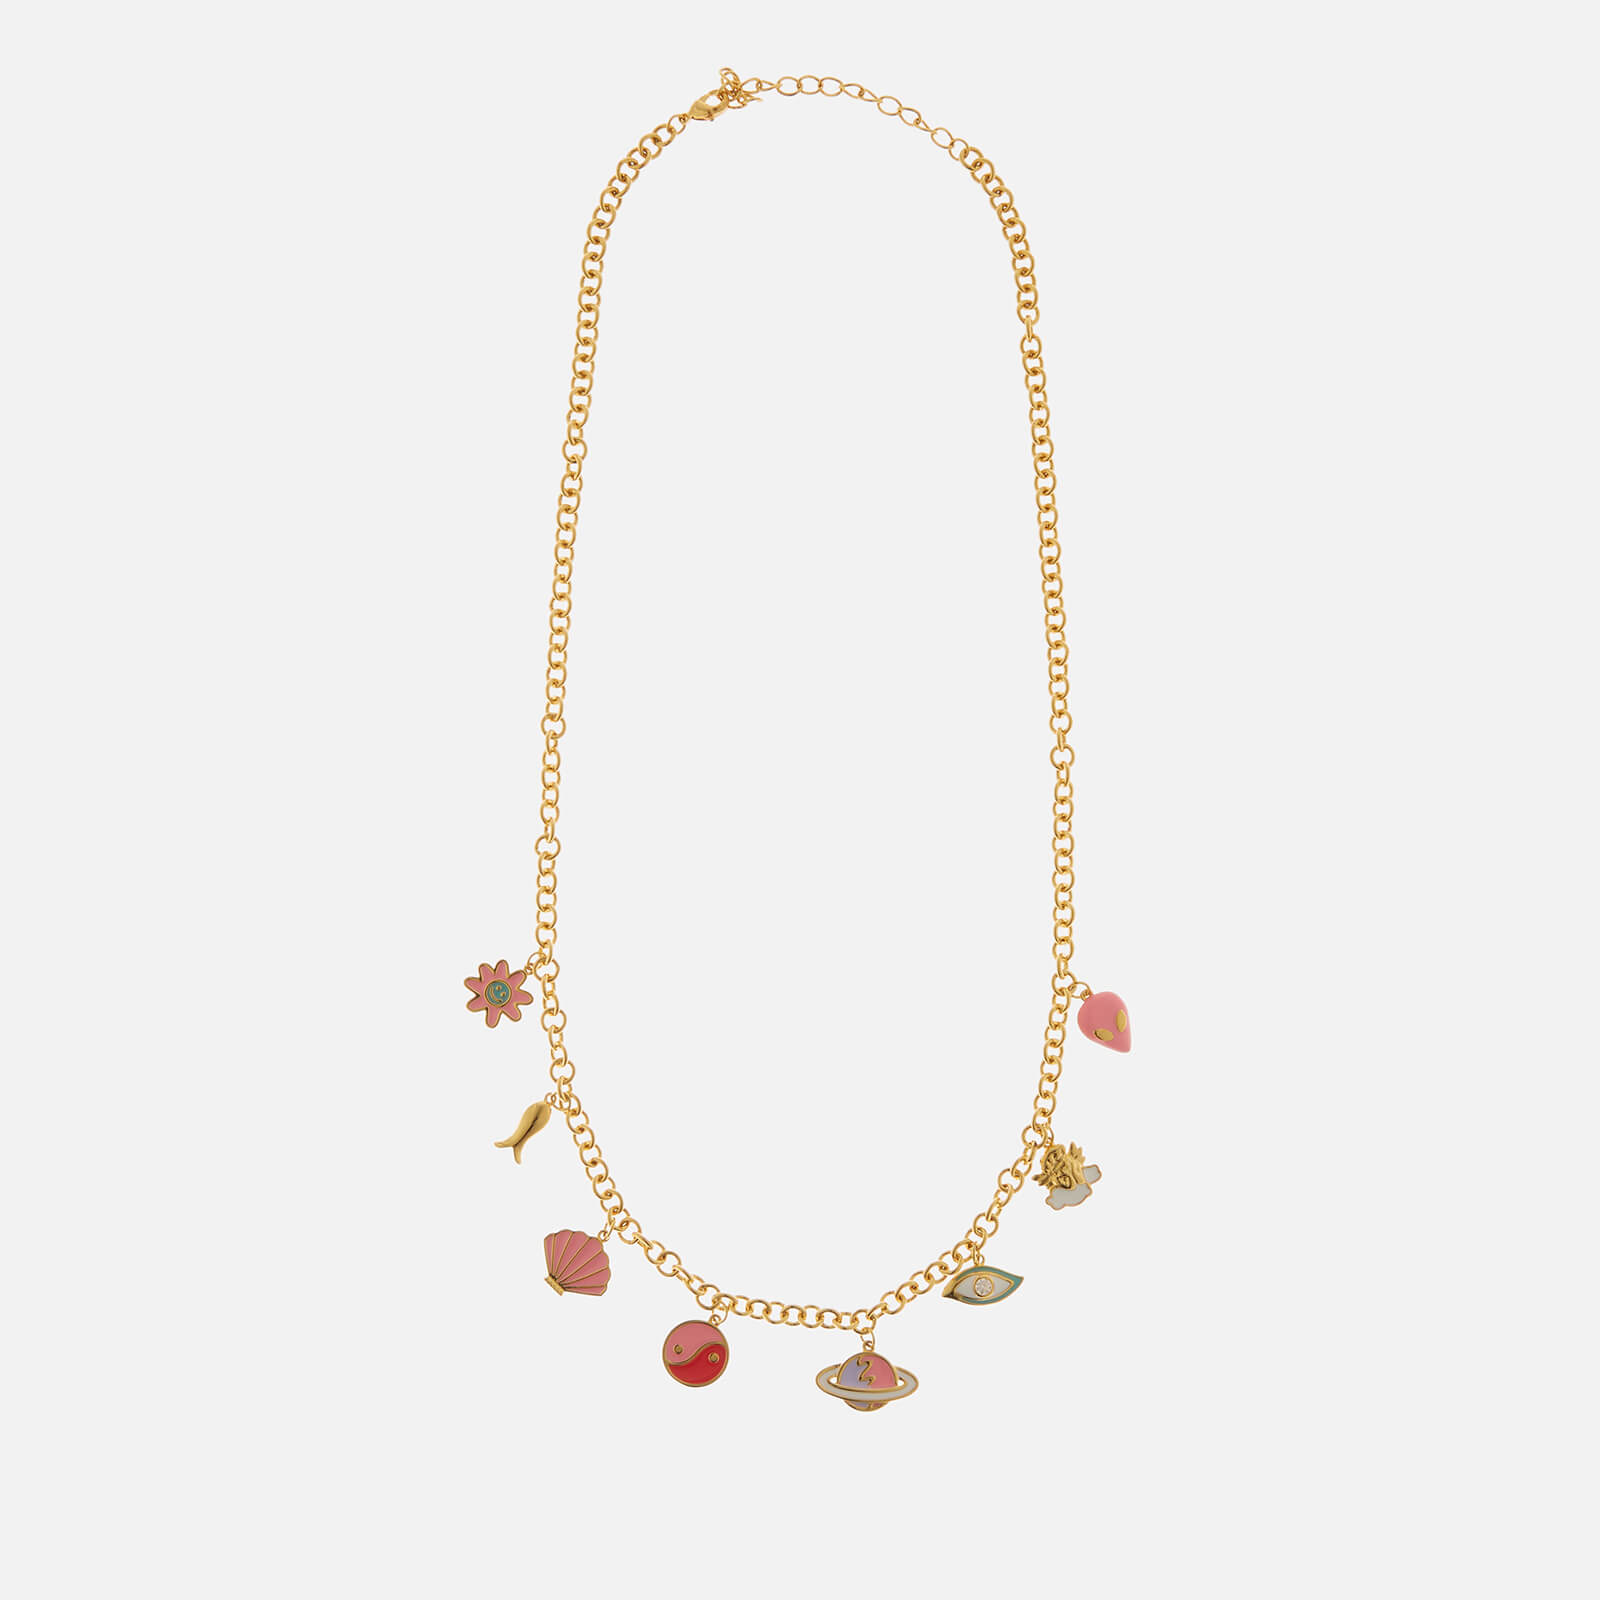 July Child Women's Ariel Cosmo Necklace - Gold